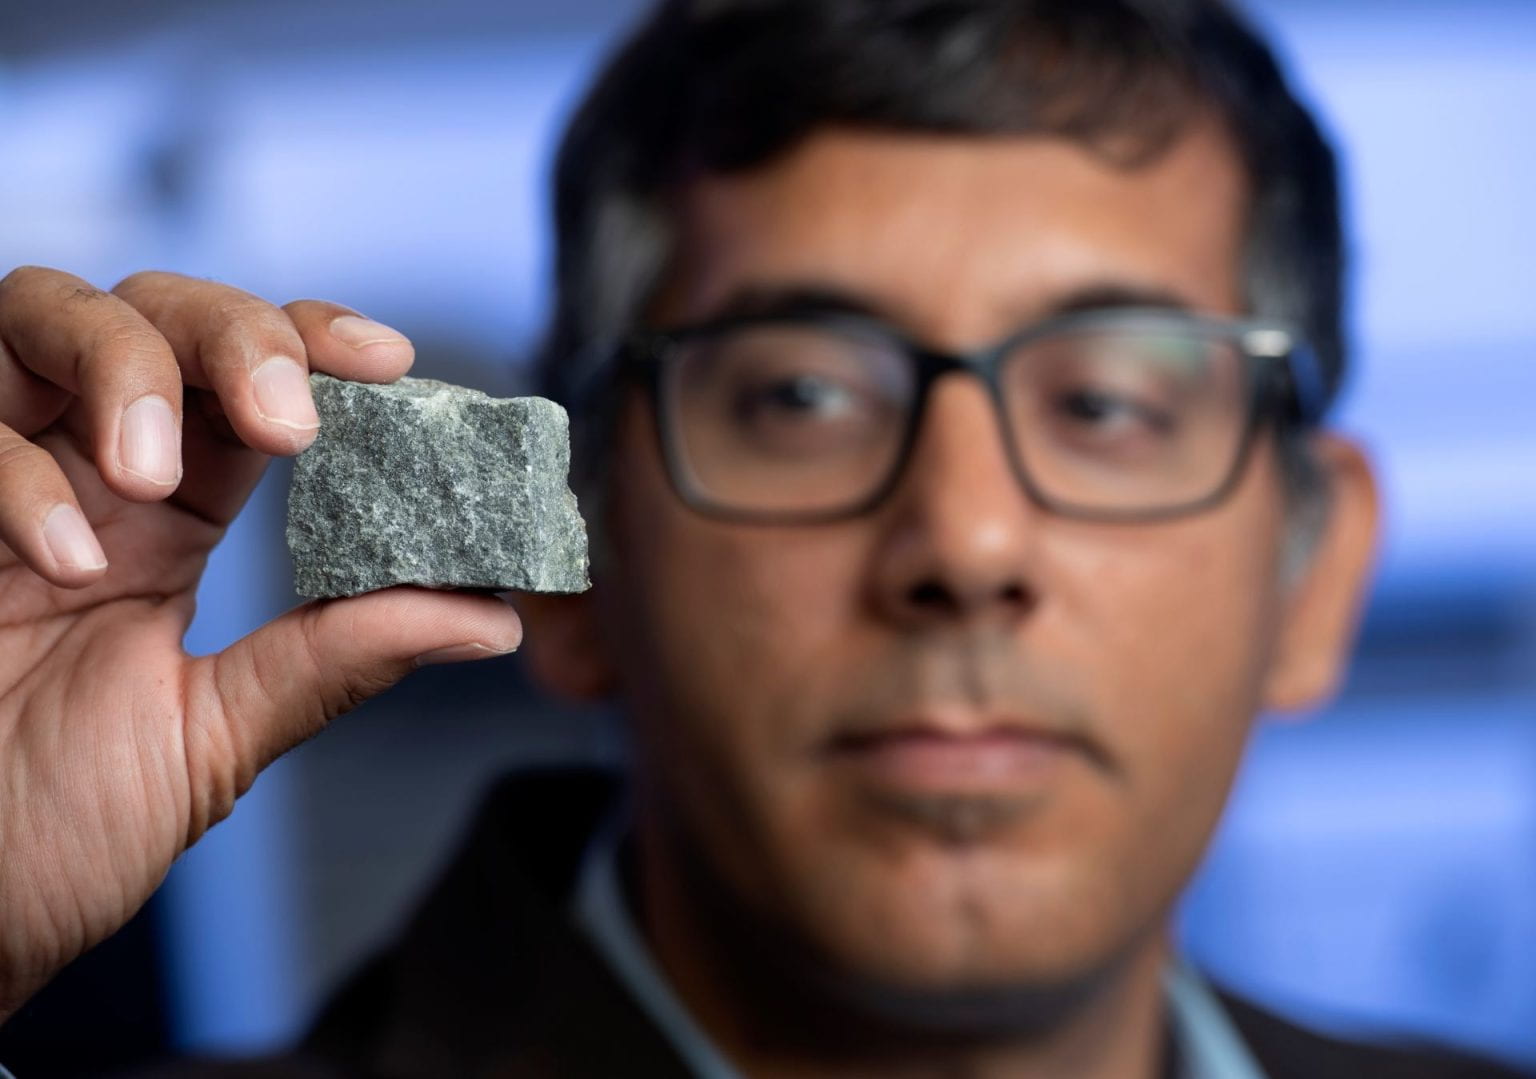 M.J. Abdolhosseini Qomi, UCI associate professor of civil and environmental engineering, says: “Certain types of rocks, such as those containing basalt, are rich in divalent metal cations that naturally convert CO2 into stable metal carbonate matter. Understanding how this process works at the molecular level will help us utilize this beneficial chemistry to help solve the problem of runaway climate change.” Steve Zylius / UCI